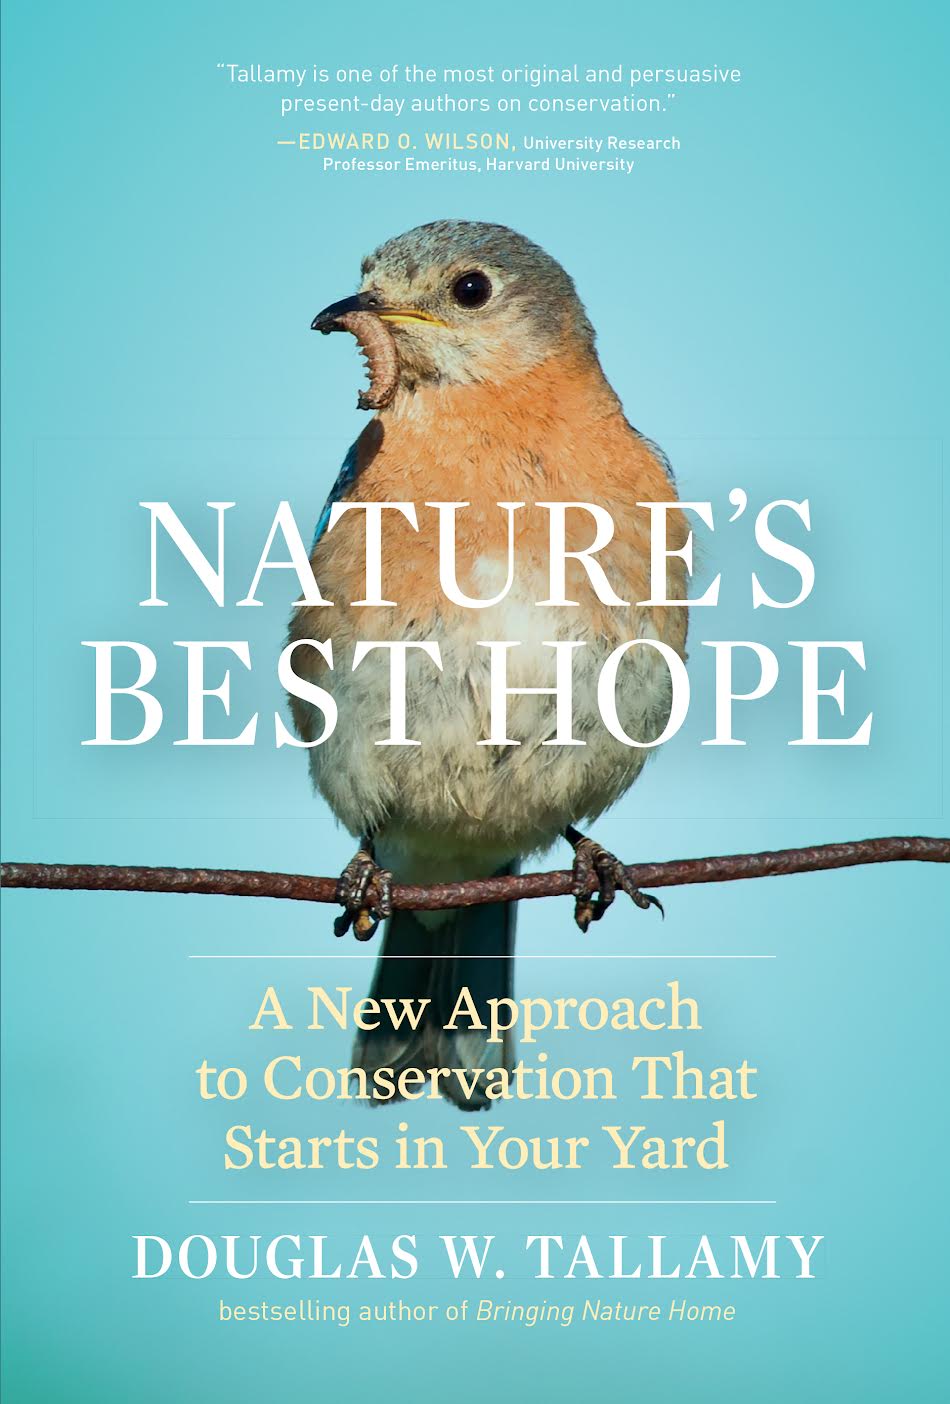 What Is Nature’s Best Hope?